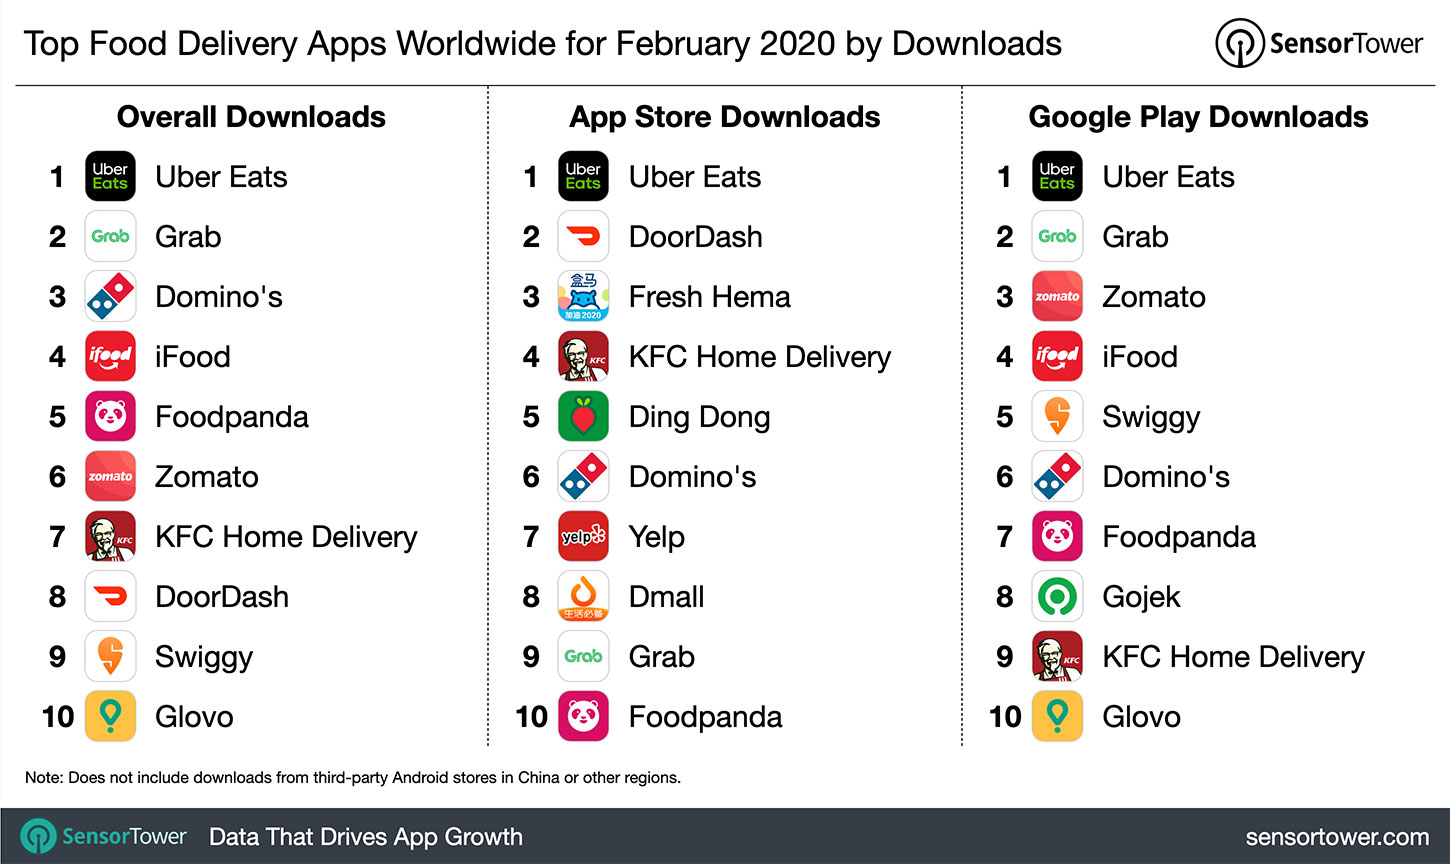 Top Food Delivery Apps Worldwide for February 2020 by Downloads